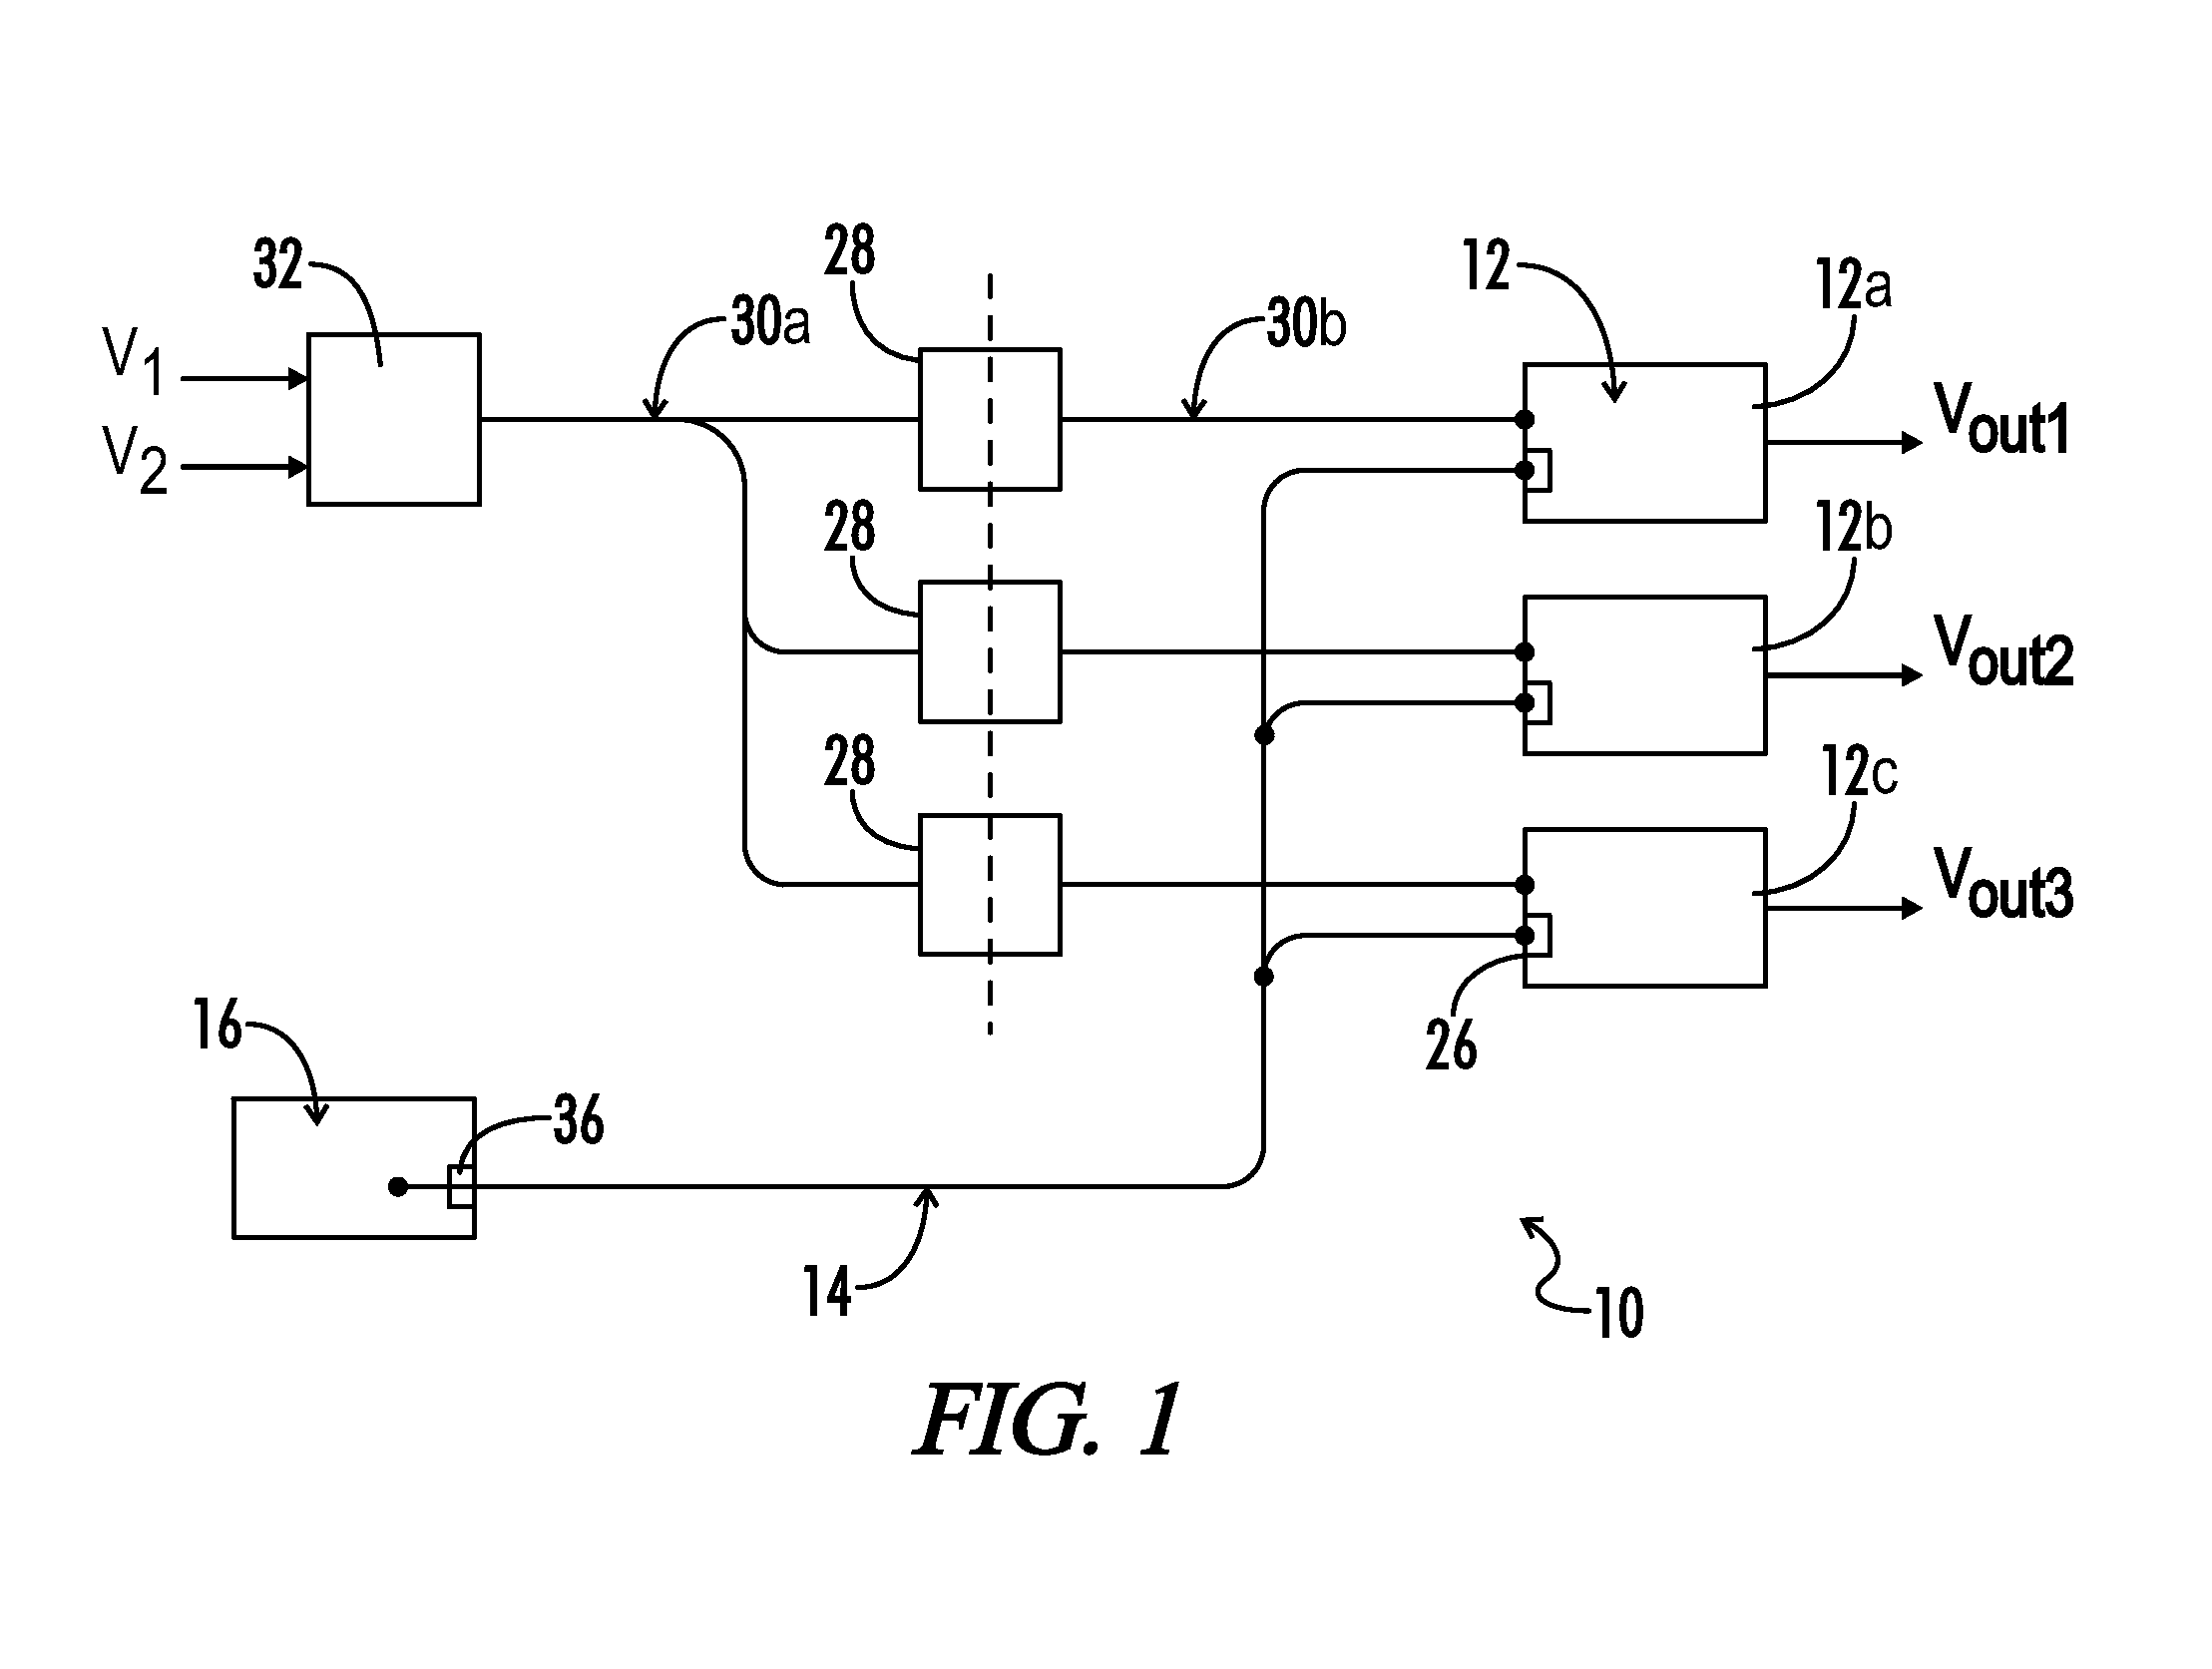 Power supply architecture for controlling and monitoring isolated output modules